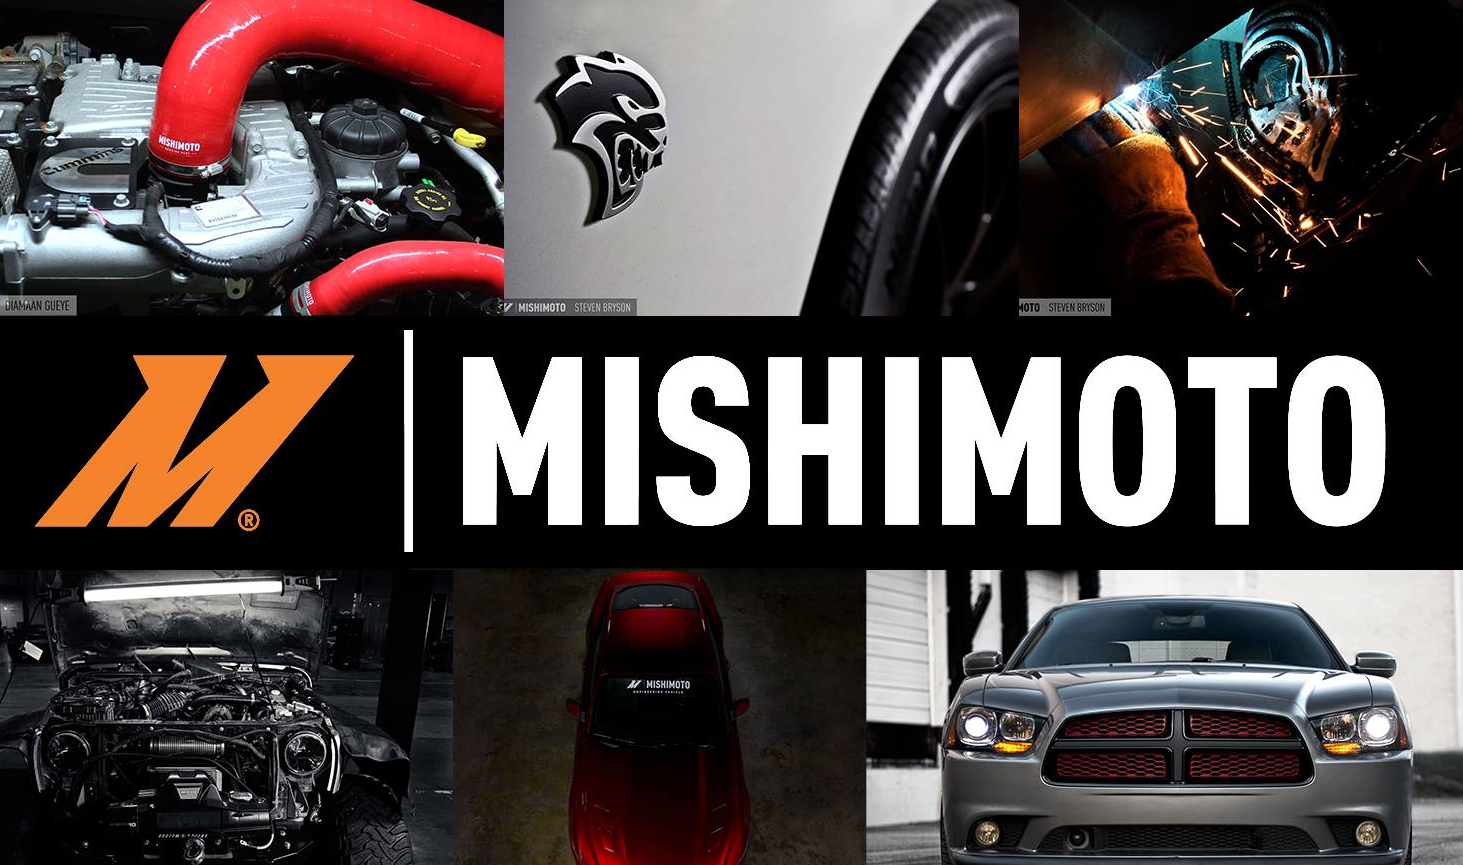 Extra 7% OFF sitewide at Mishimoto with coupon